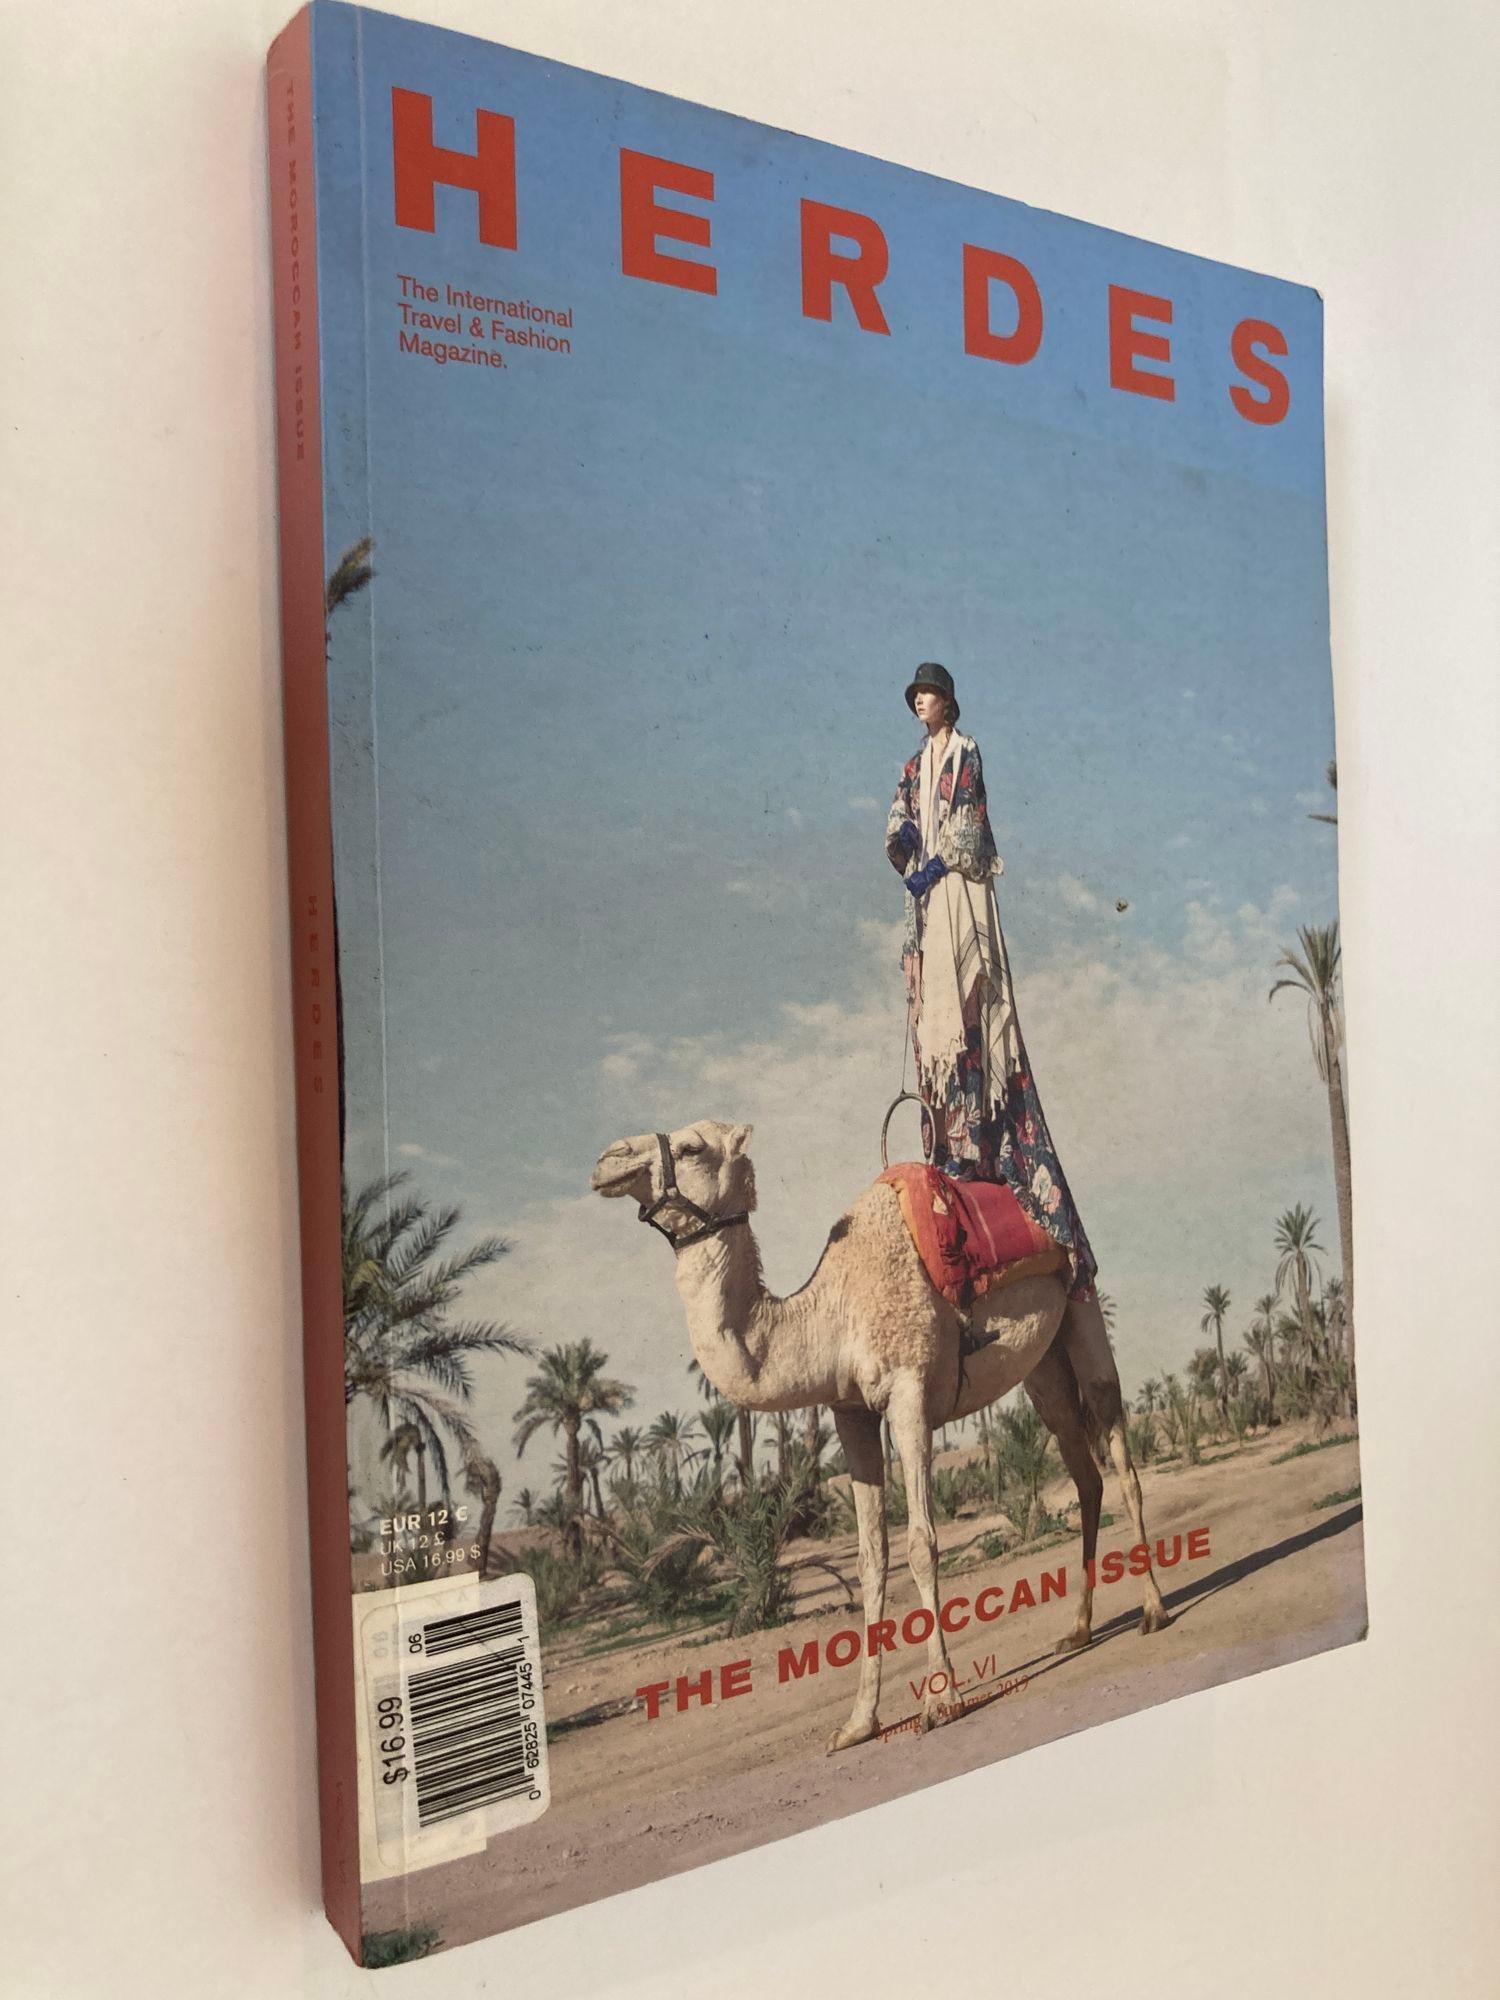 The Moroccan Issue · Vol. Vi, Herdes.15 July, 2019 For Sale 7